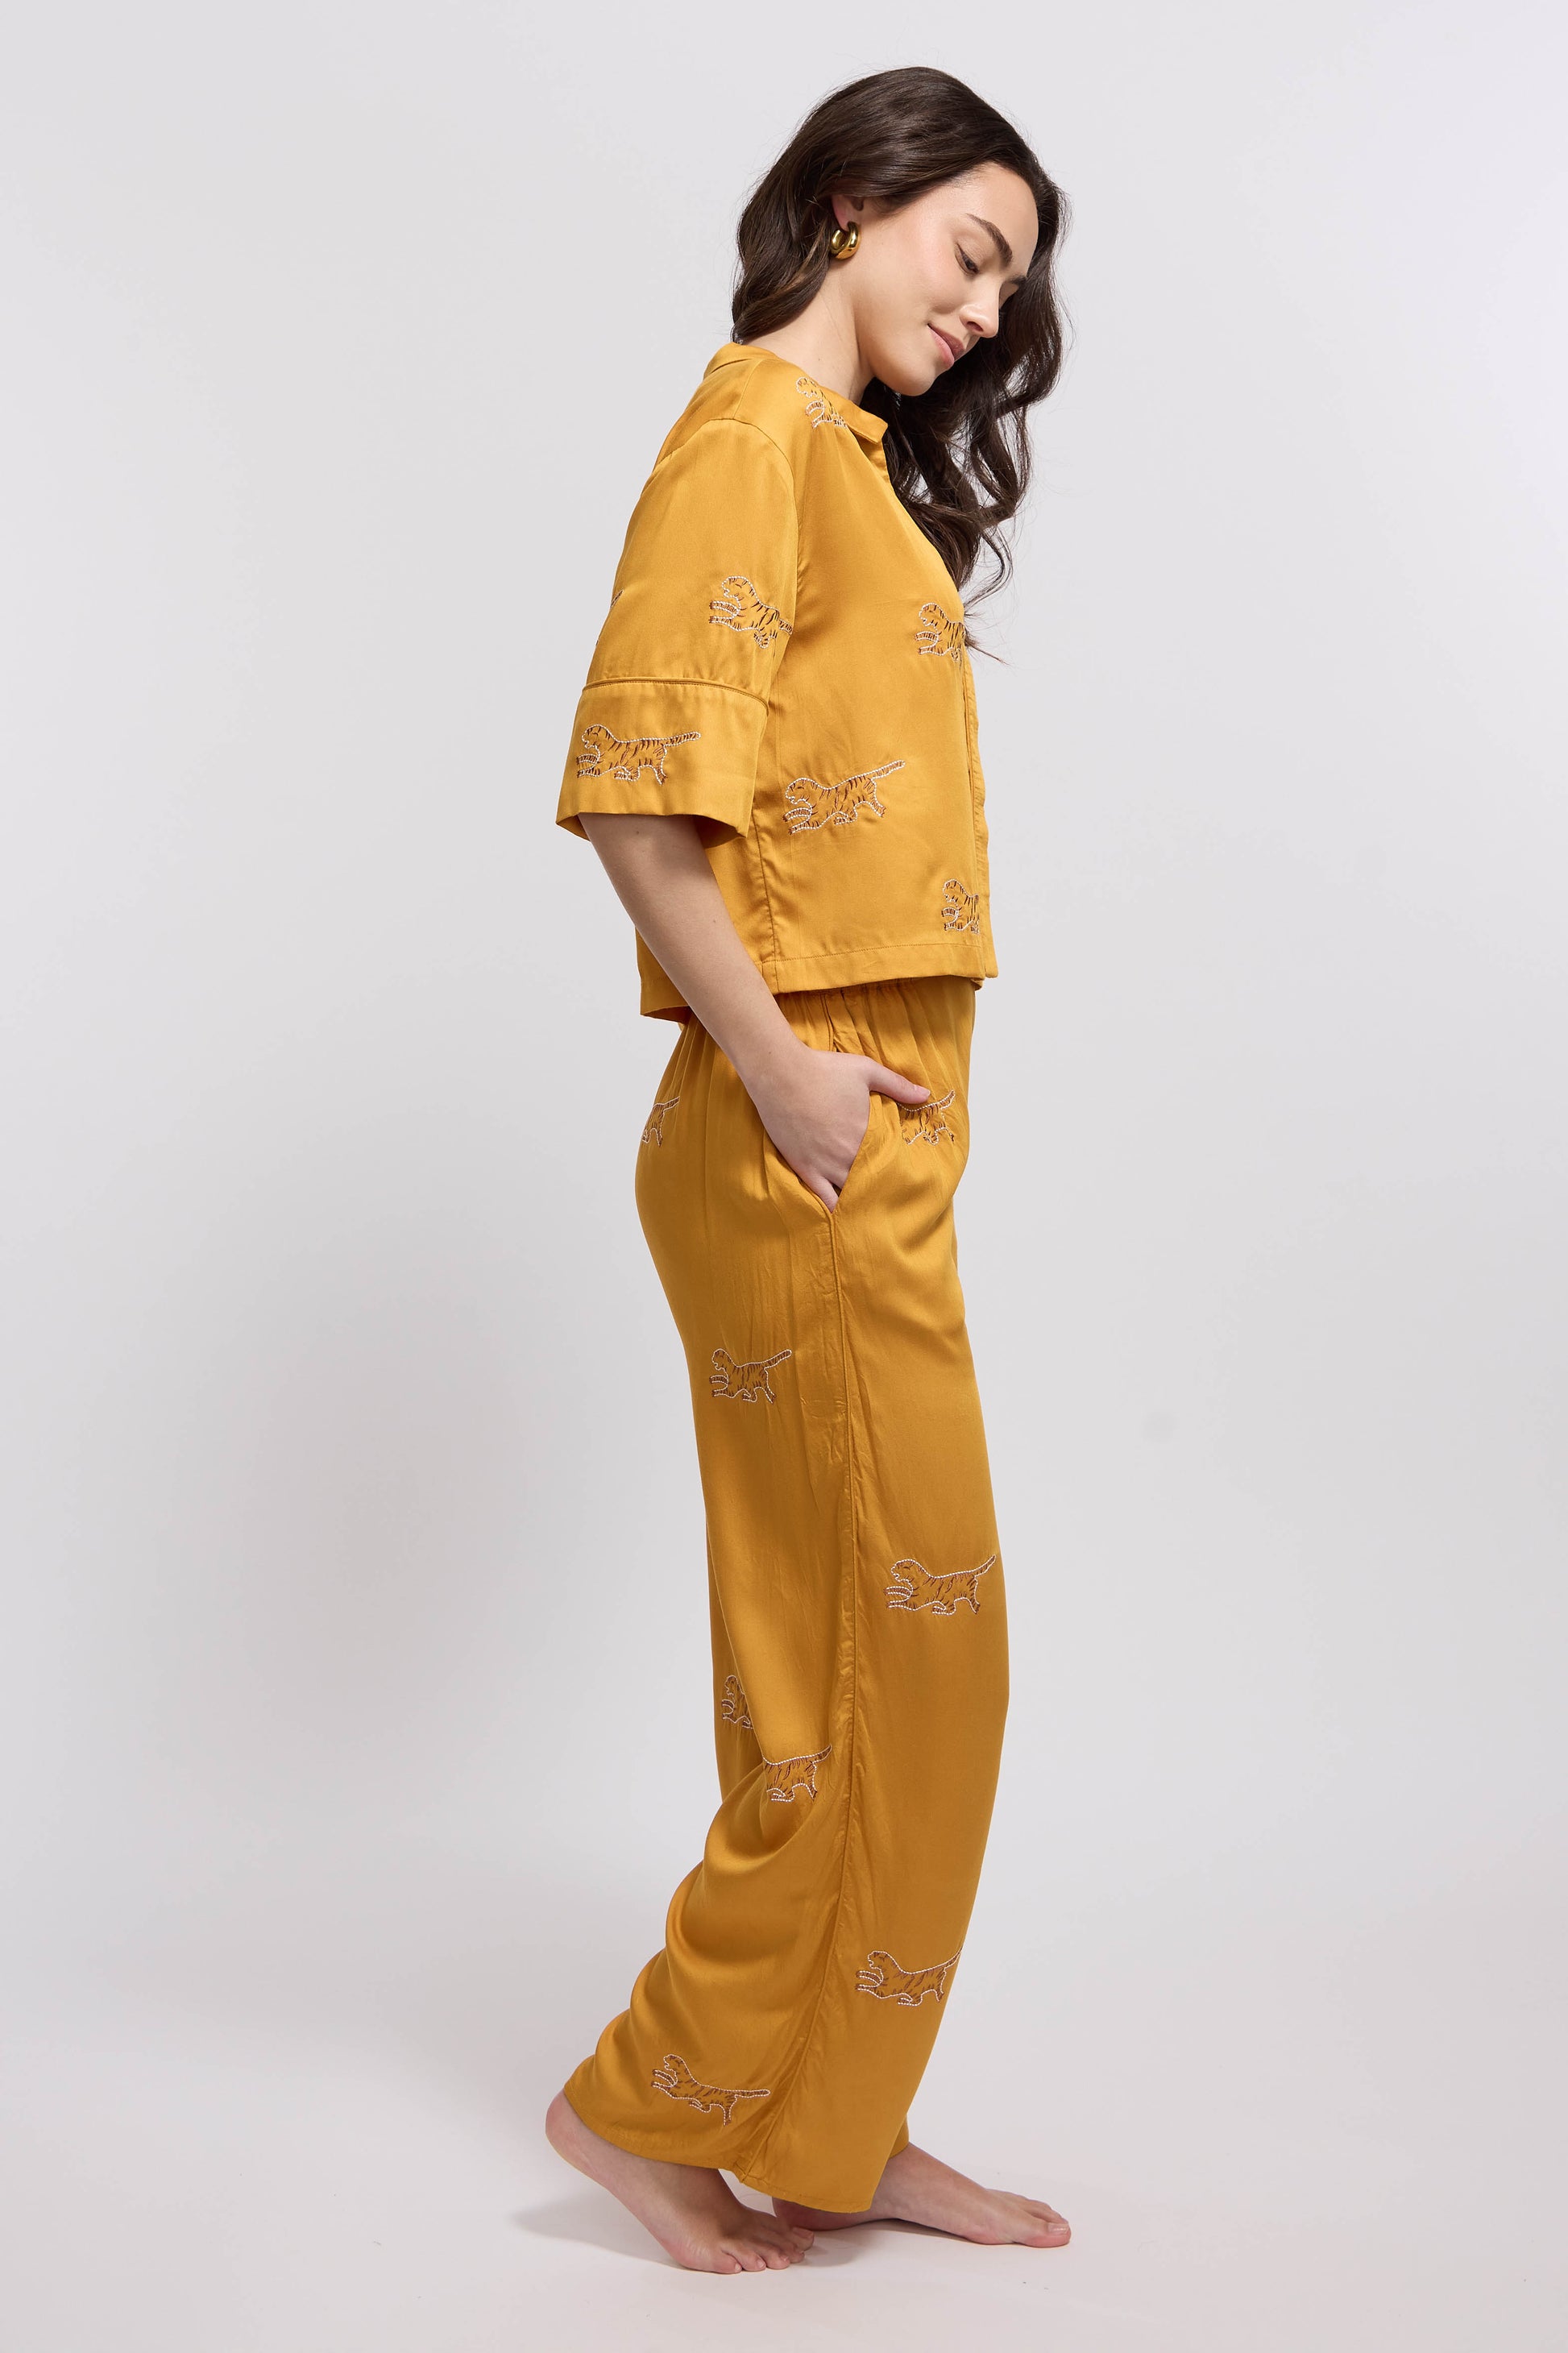 A woman wearing a marigold colored loungewear set with tiger embroidery.